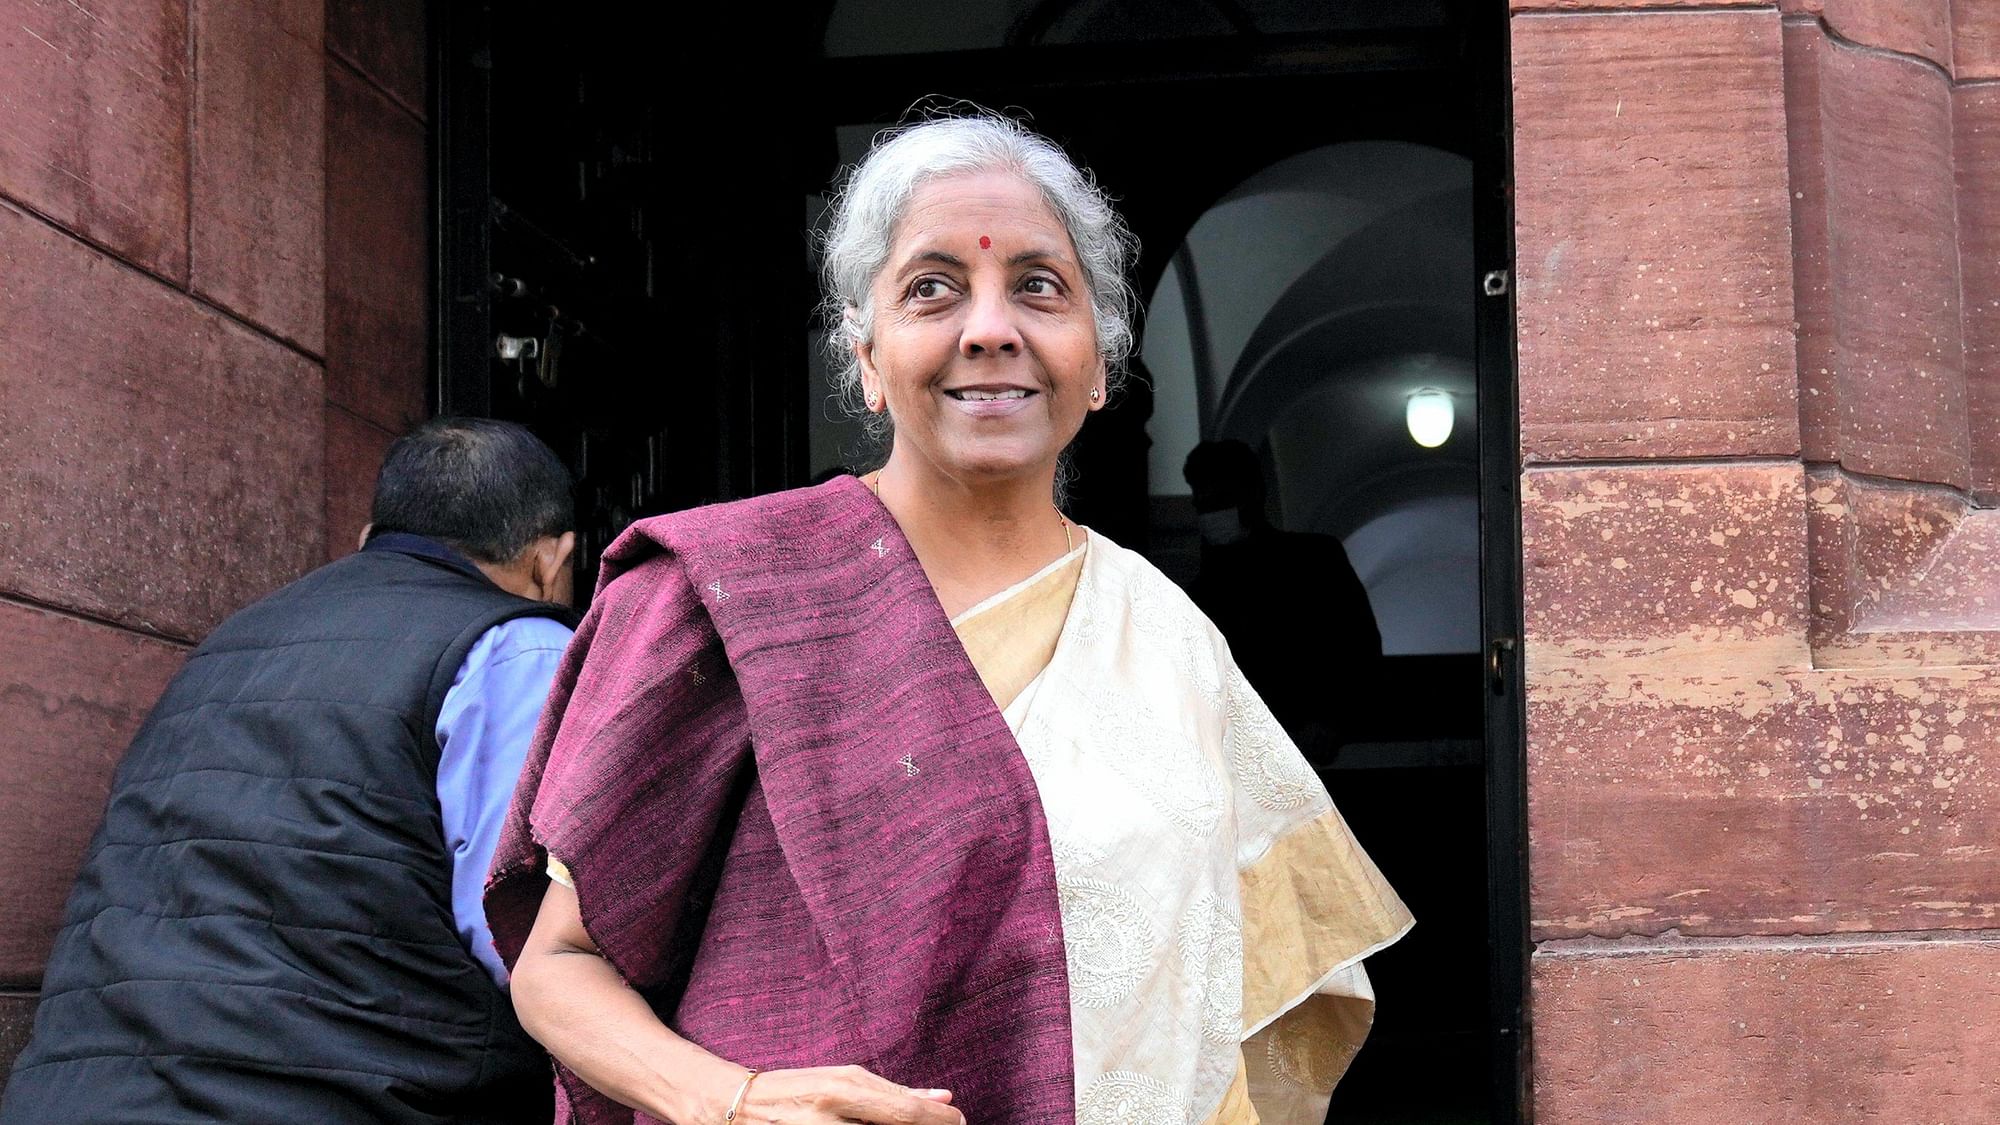 <div class="paragraphs"><p>During the winter session of the parliament, on 21 December 2022, Finance Minister Nirmala Sitharaman responded to Raghav Chadha and Manoj Jha’s jabs on issues such as inflation, subsidies, and the Enforcement Directorate.</p></div>